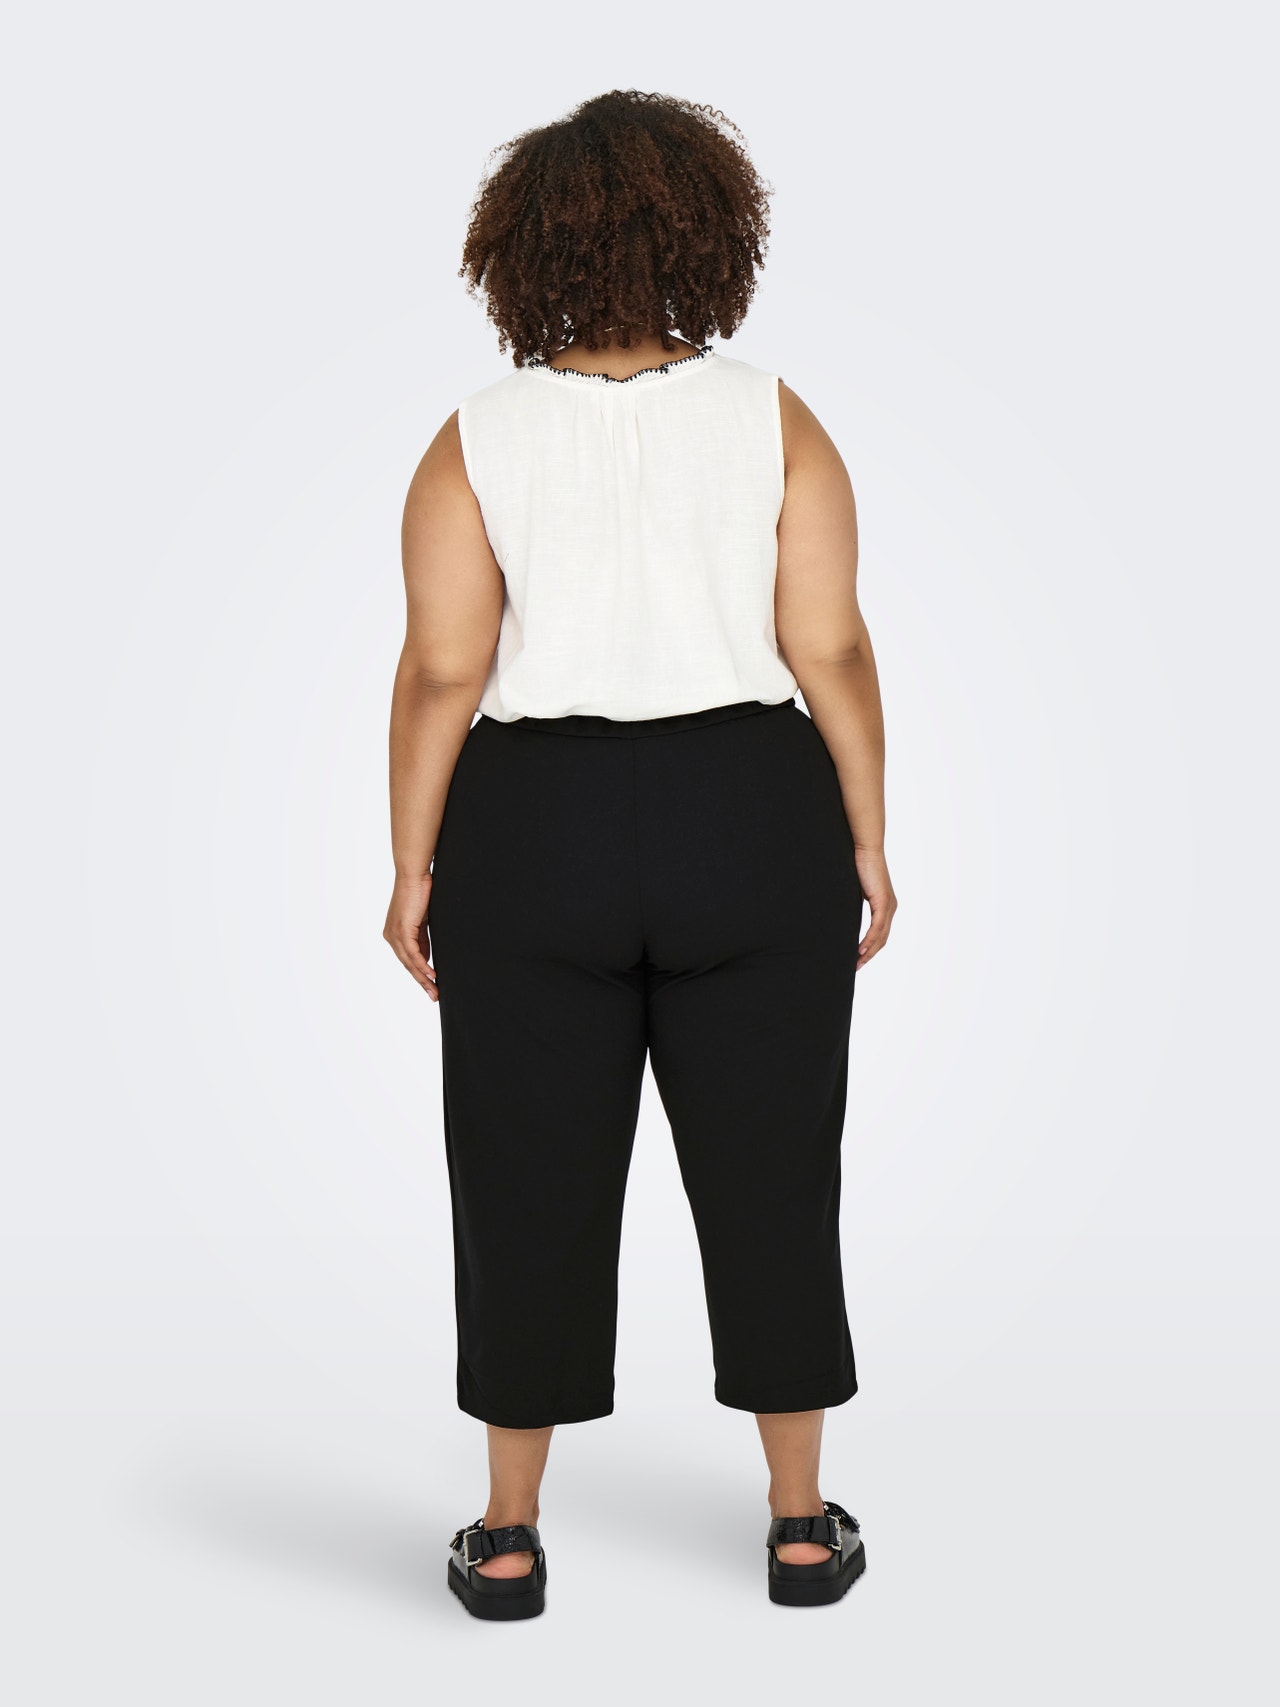 ONLY Curvy culotte trousers -Black - 15320125